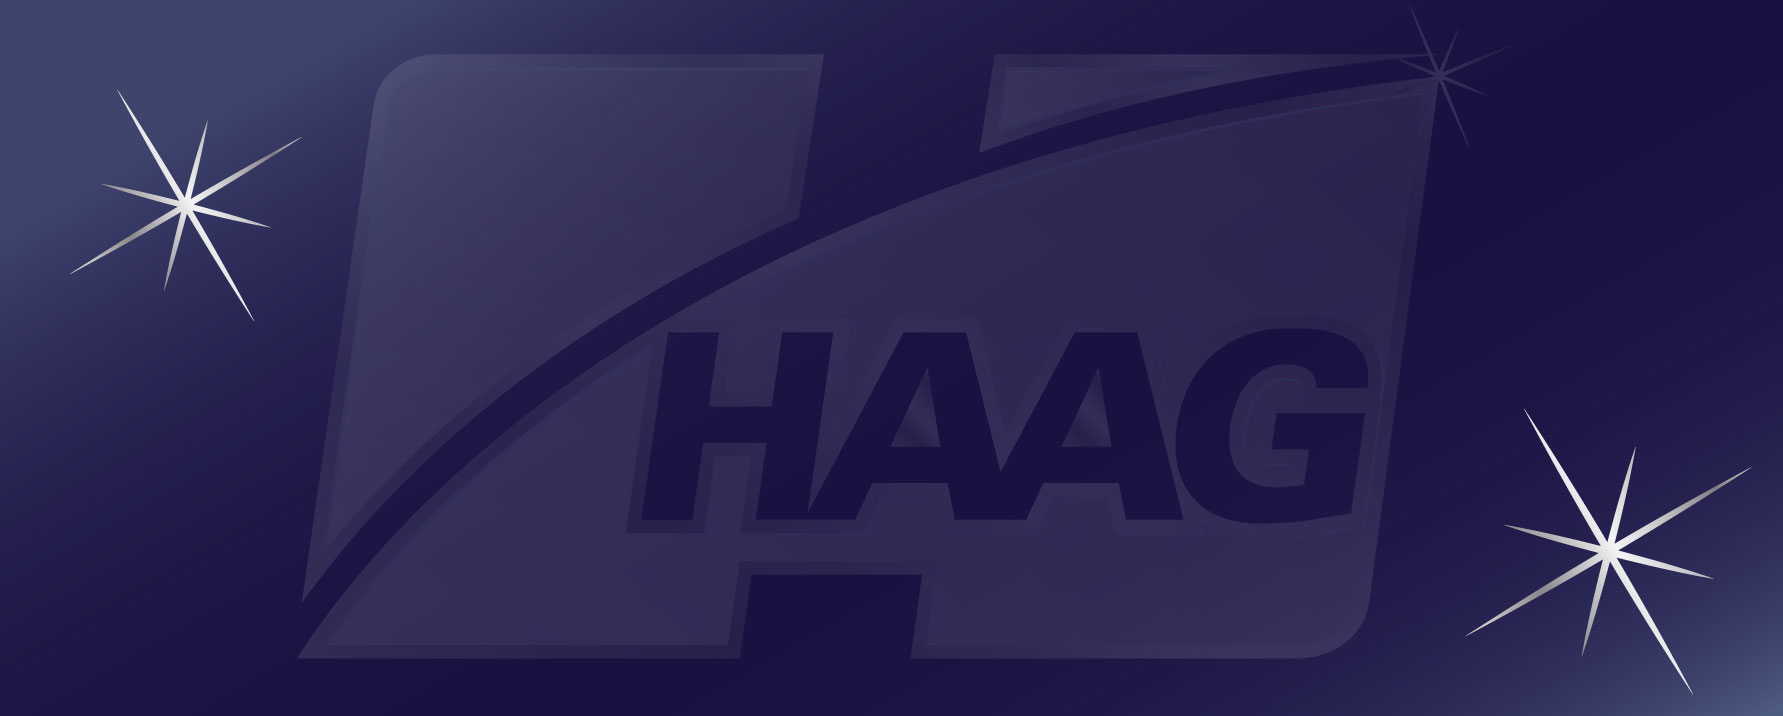 Haag 100 Year Anniversary - A century of forensic innovation